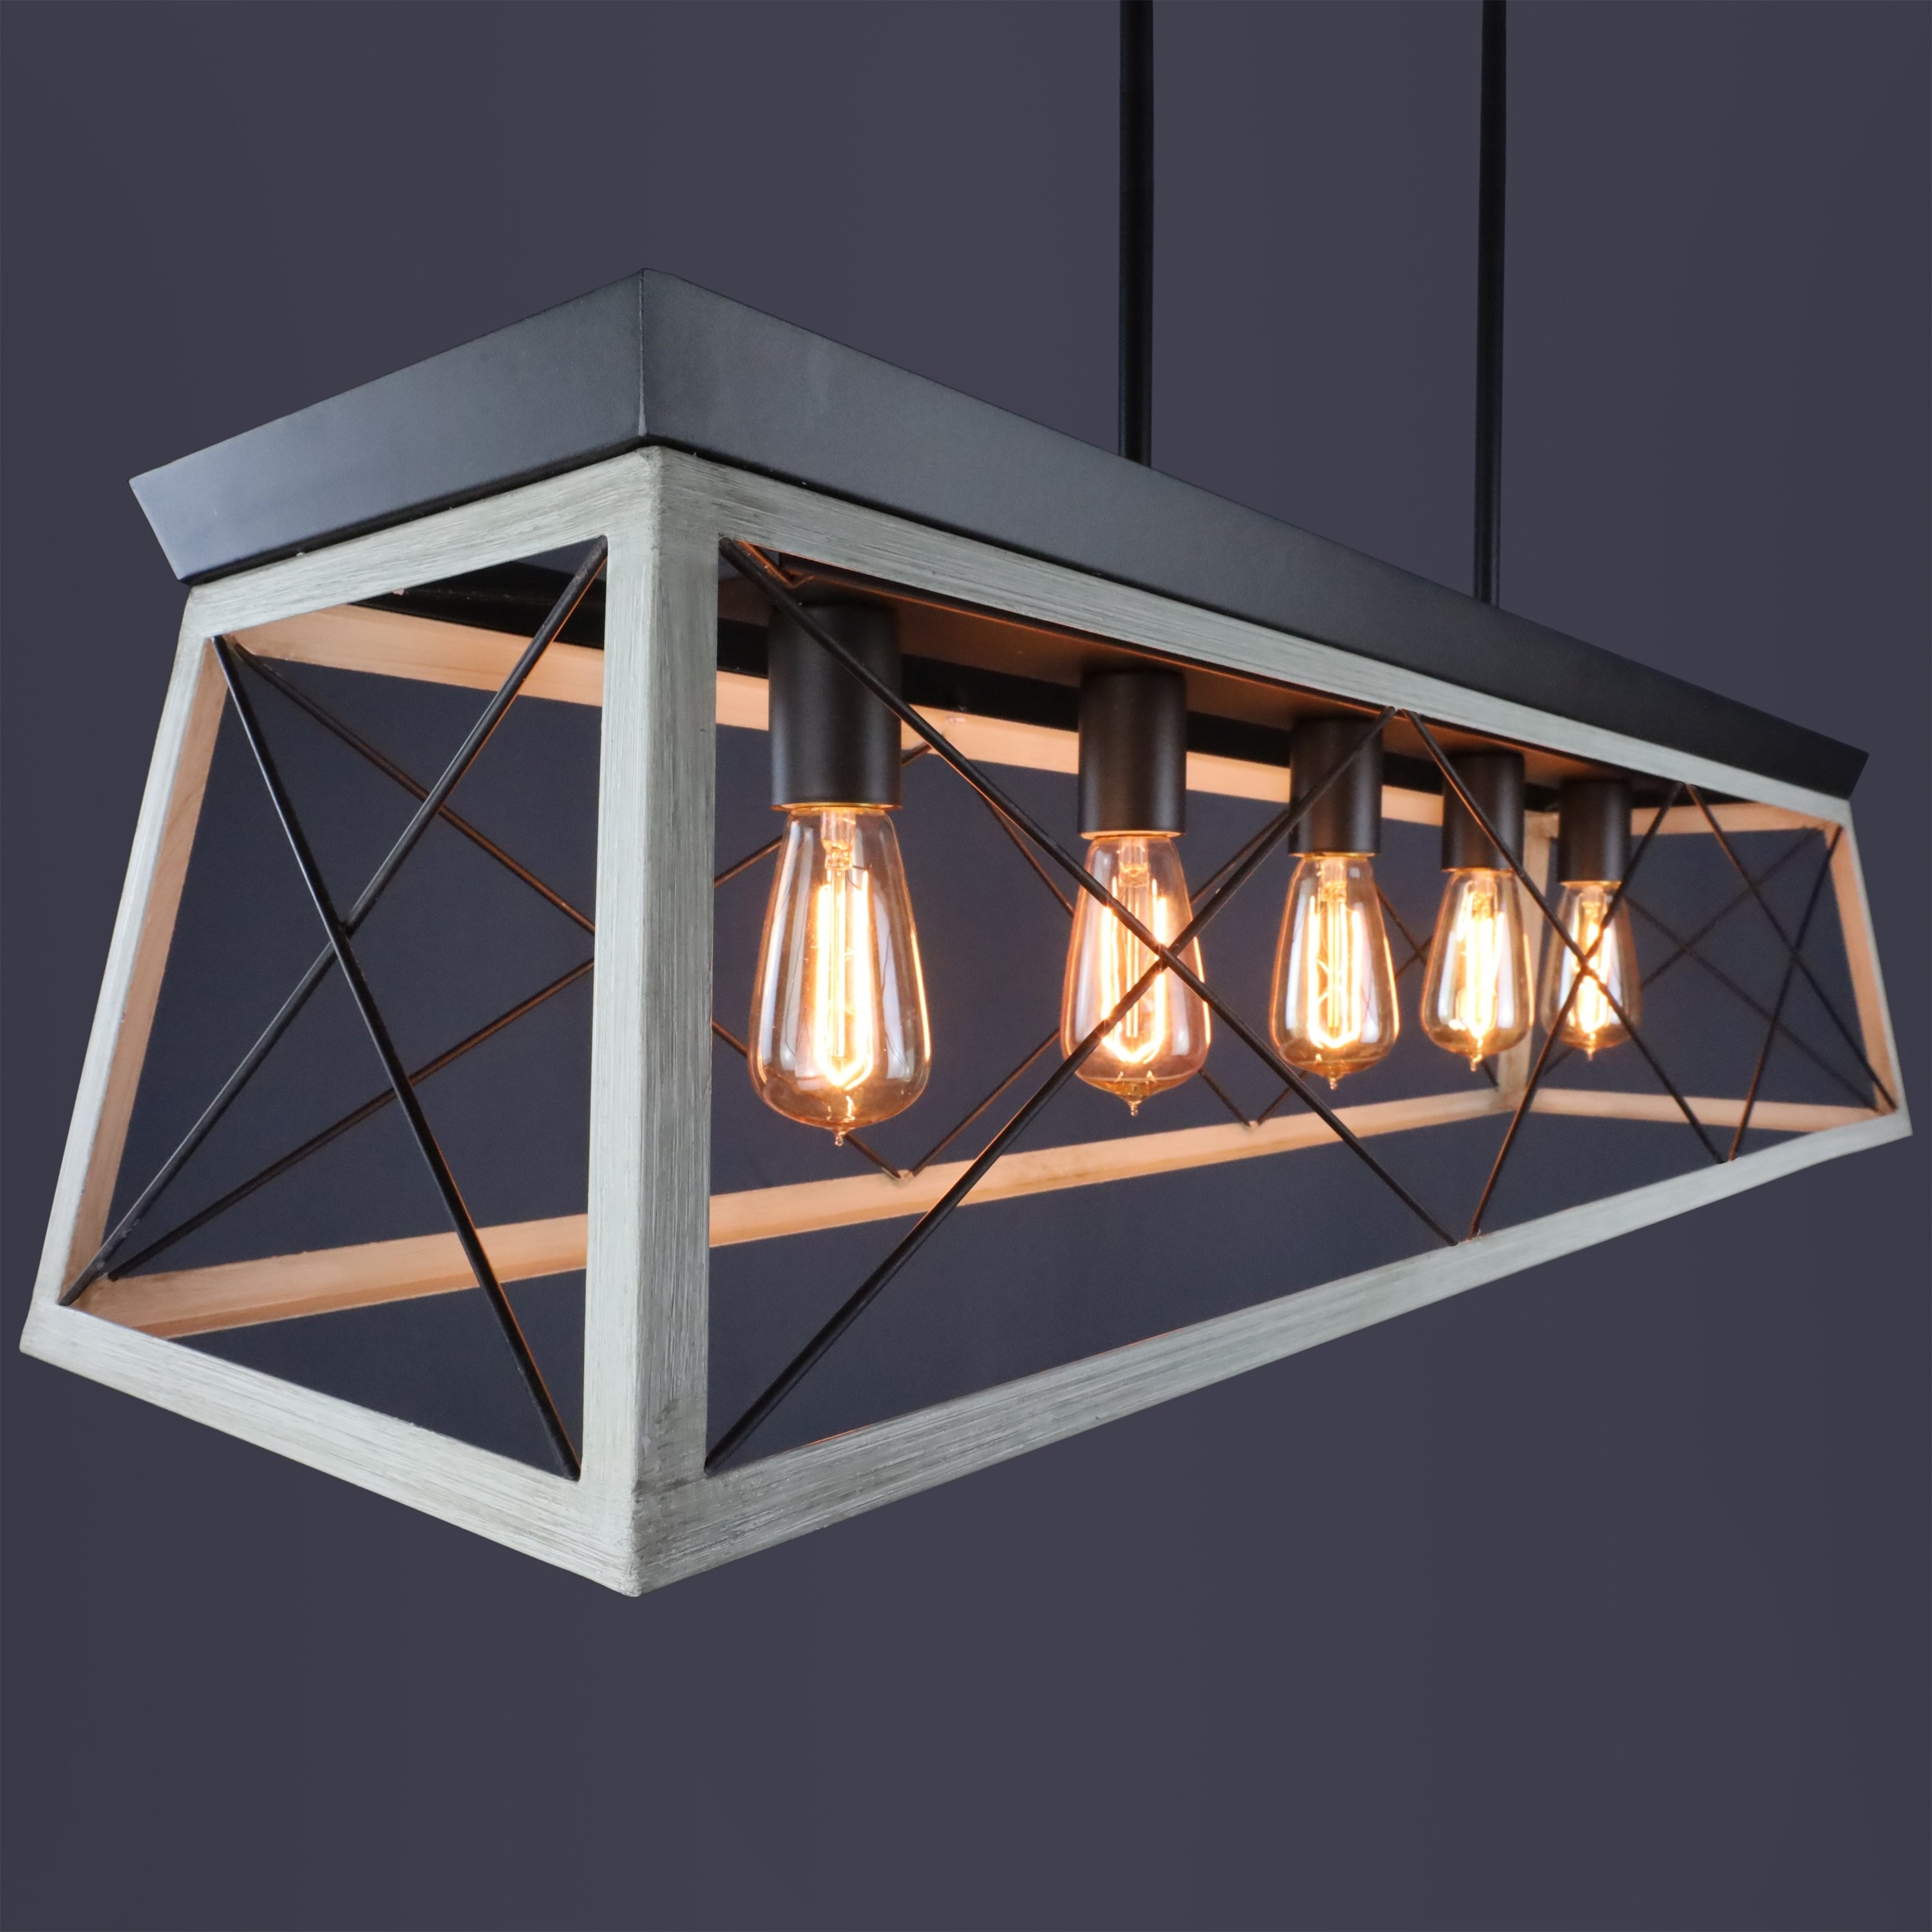 Luxury Industrial Chic Island/Linear Chandelier UHP2126 from The Berkeley Collection by Urban Ambiance Large Size: 9H x 38W Olde Bronze Finish with Modern Farmhouse Style Elements